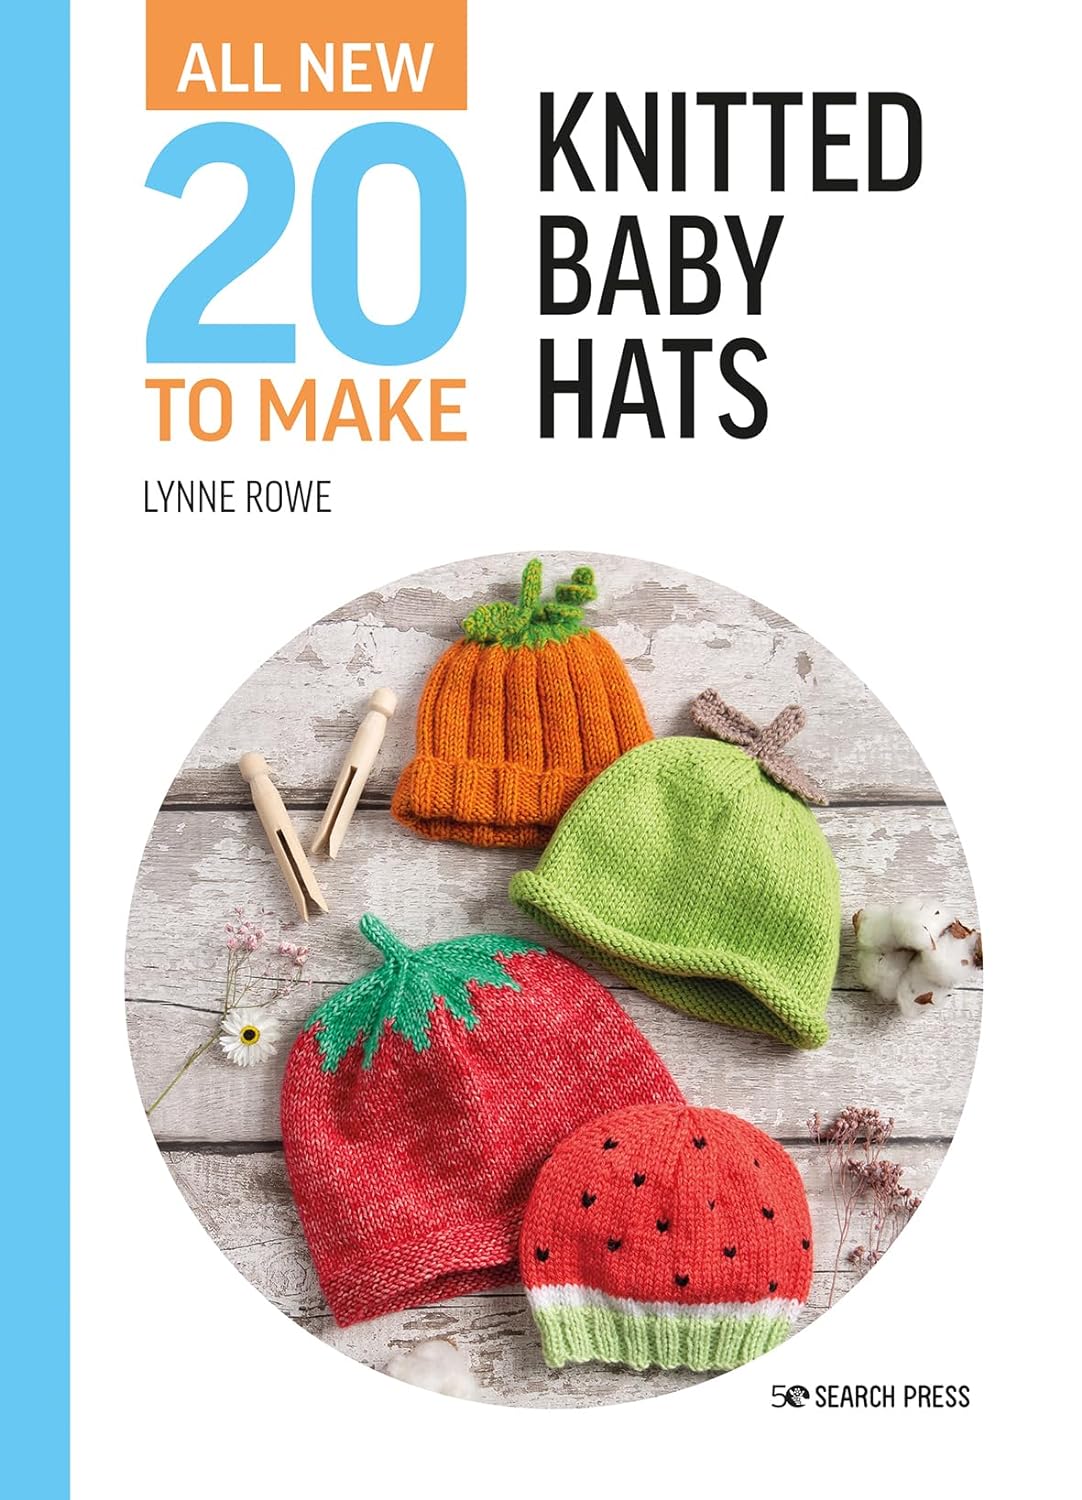 20 to Make: Knitted Baby Hats